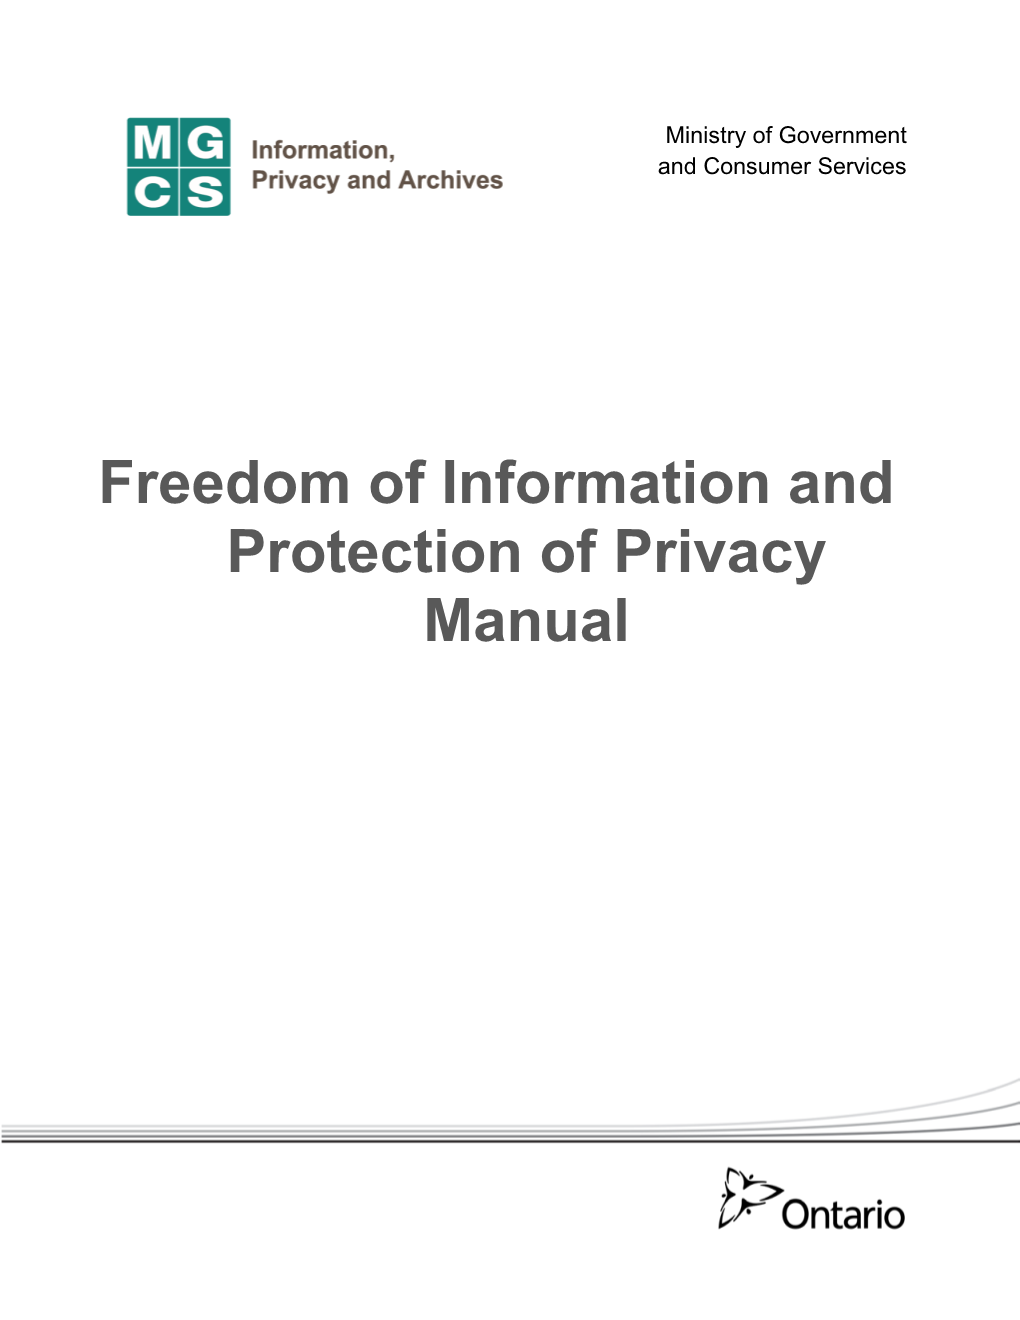 Freedom of Information and Protection of Privacy Manual